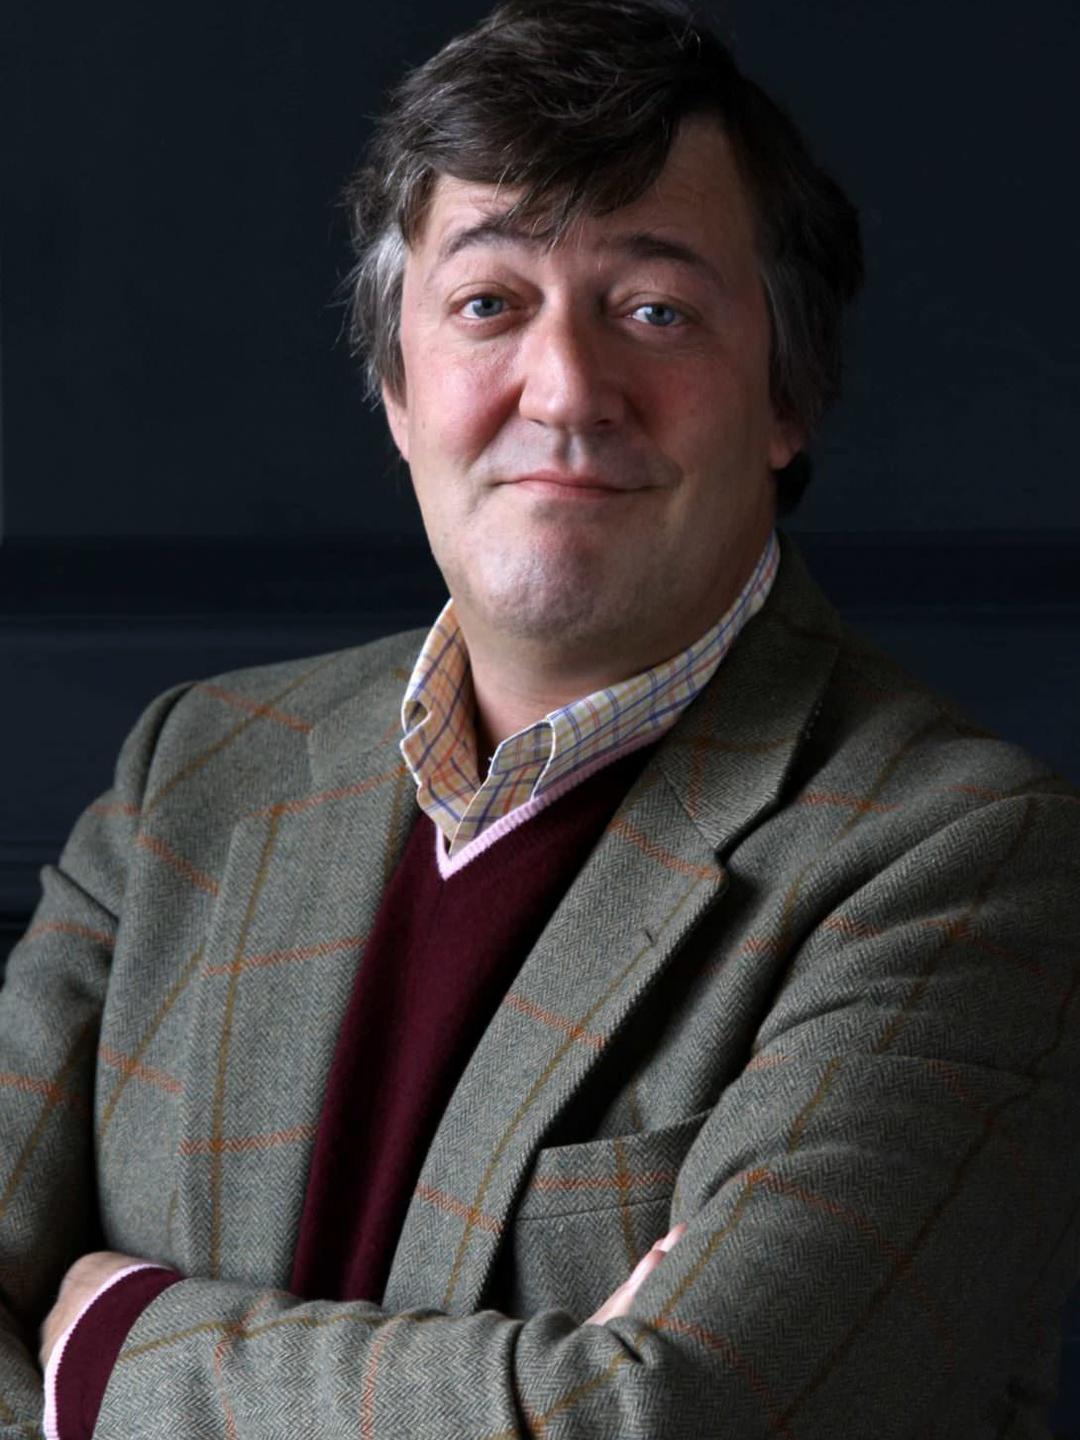 Stephen Fry early life